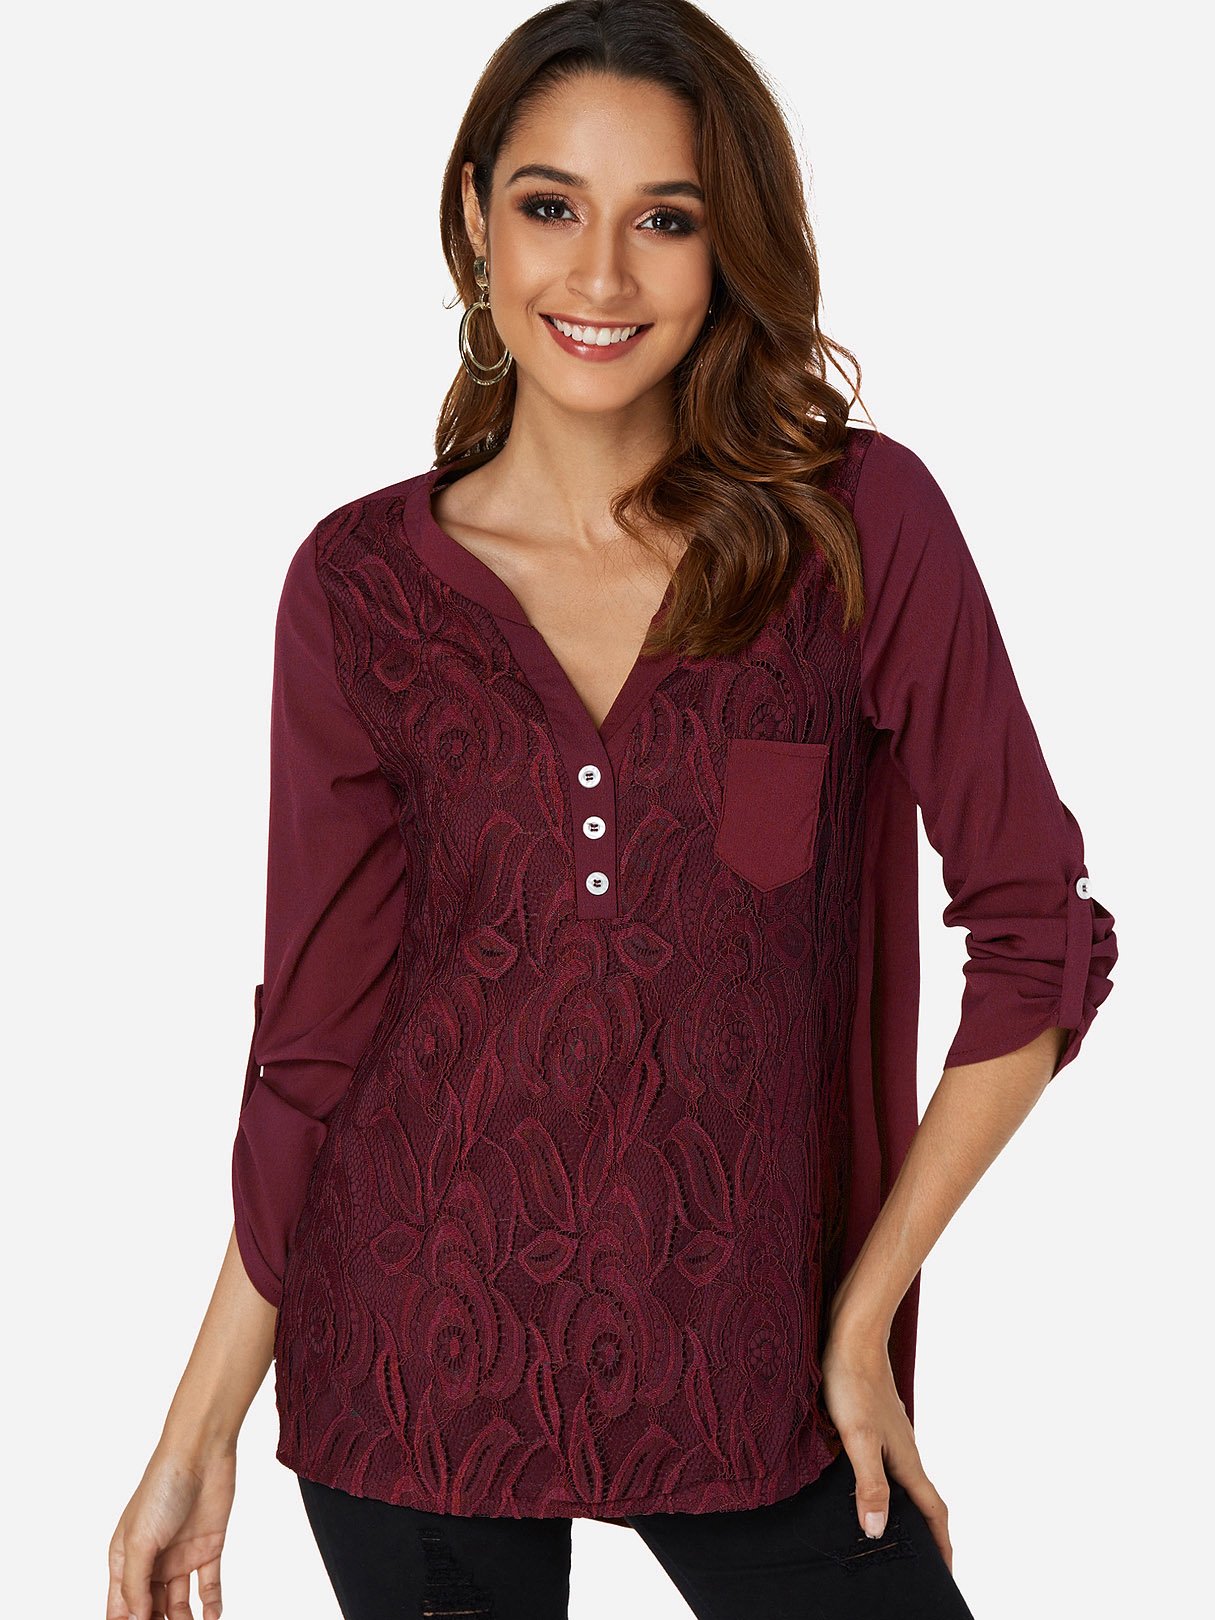 Where To Buy Foxcroft Blouses